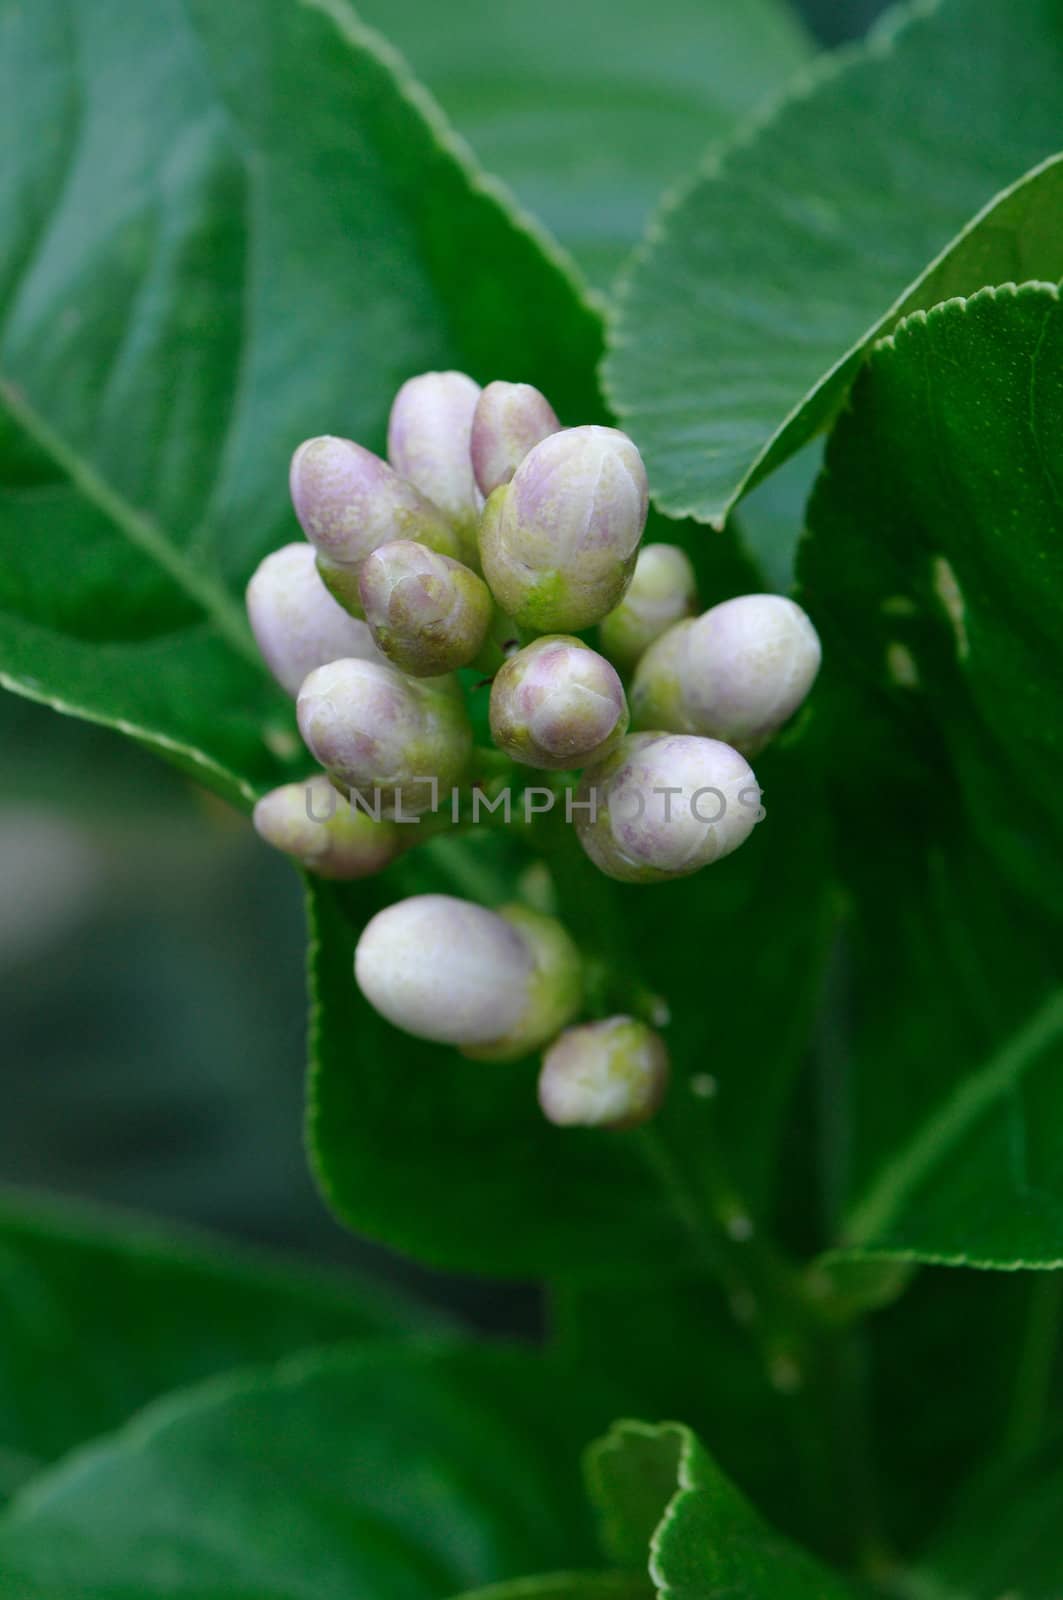 Tuft of little white buds with green leafs